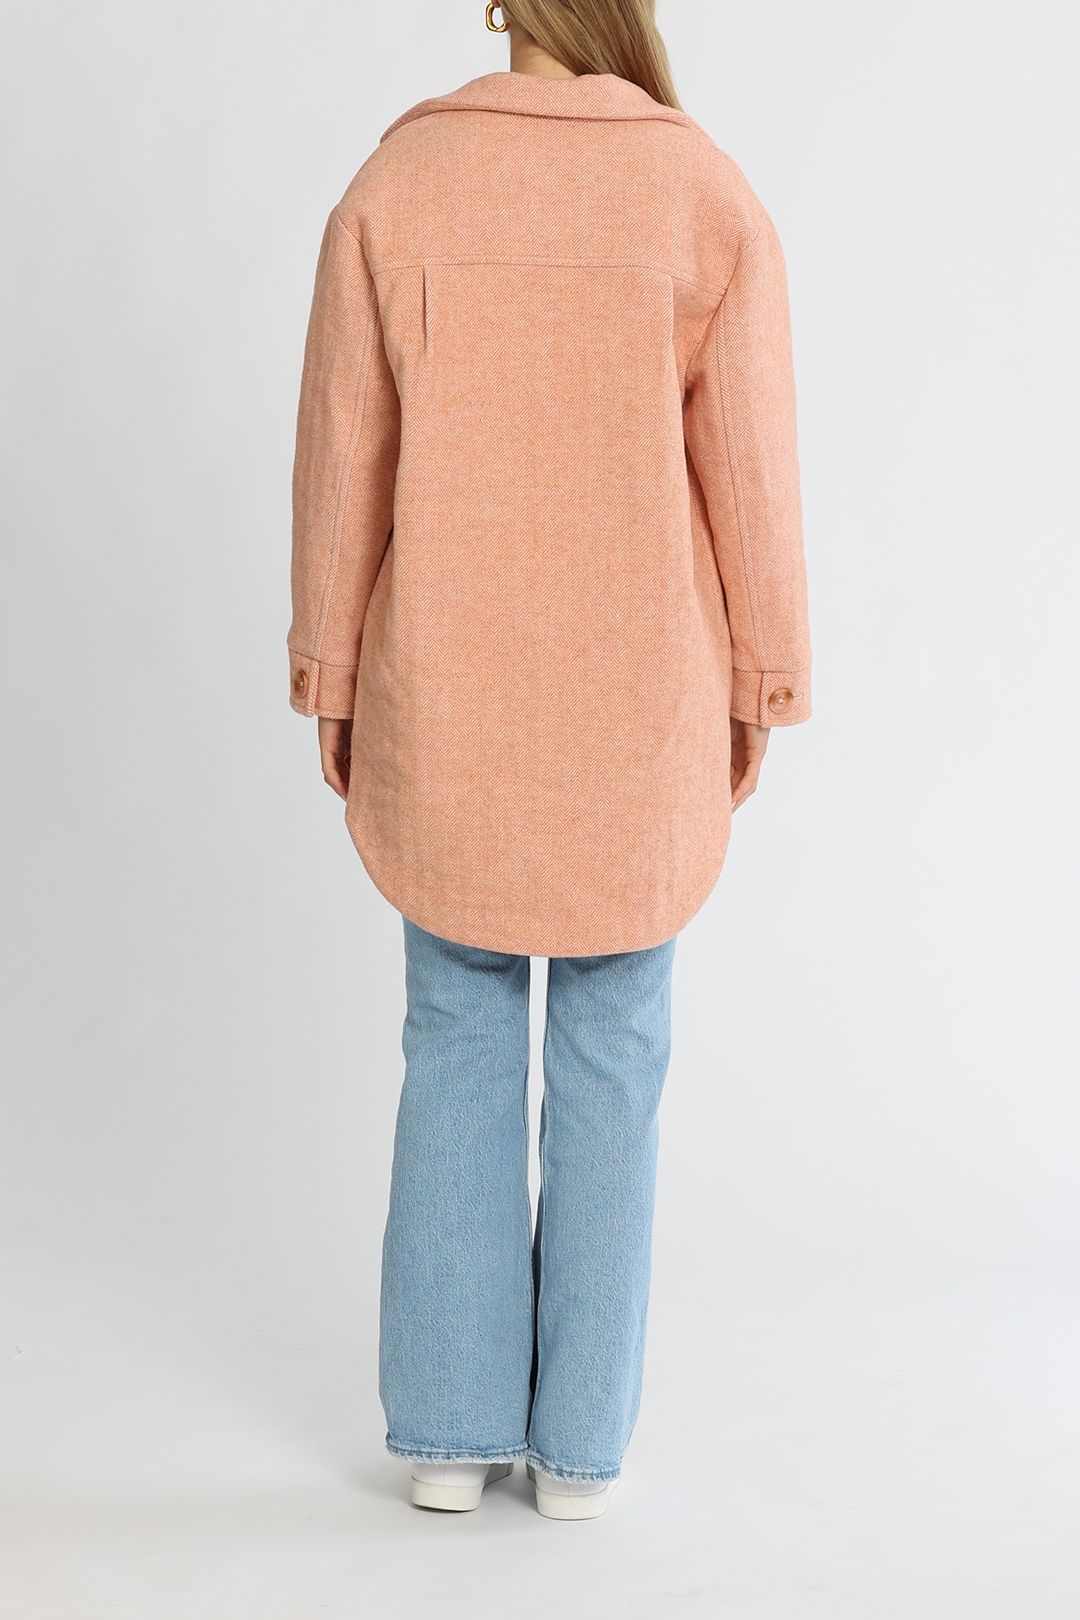 Steele Maude Shacket Spice Relaxed Fit